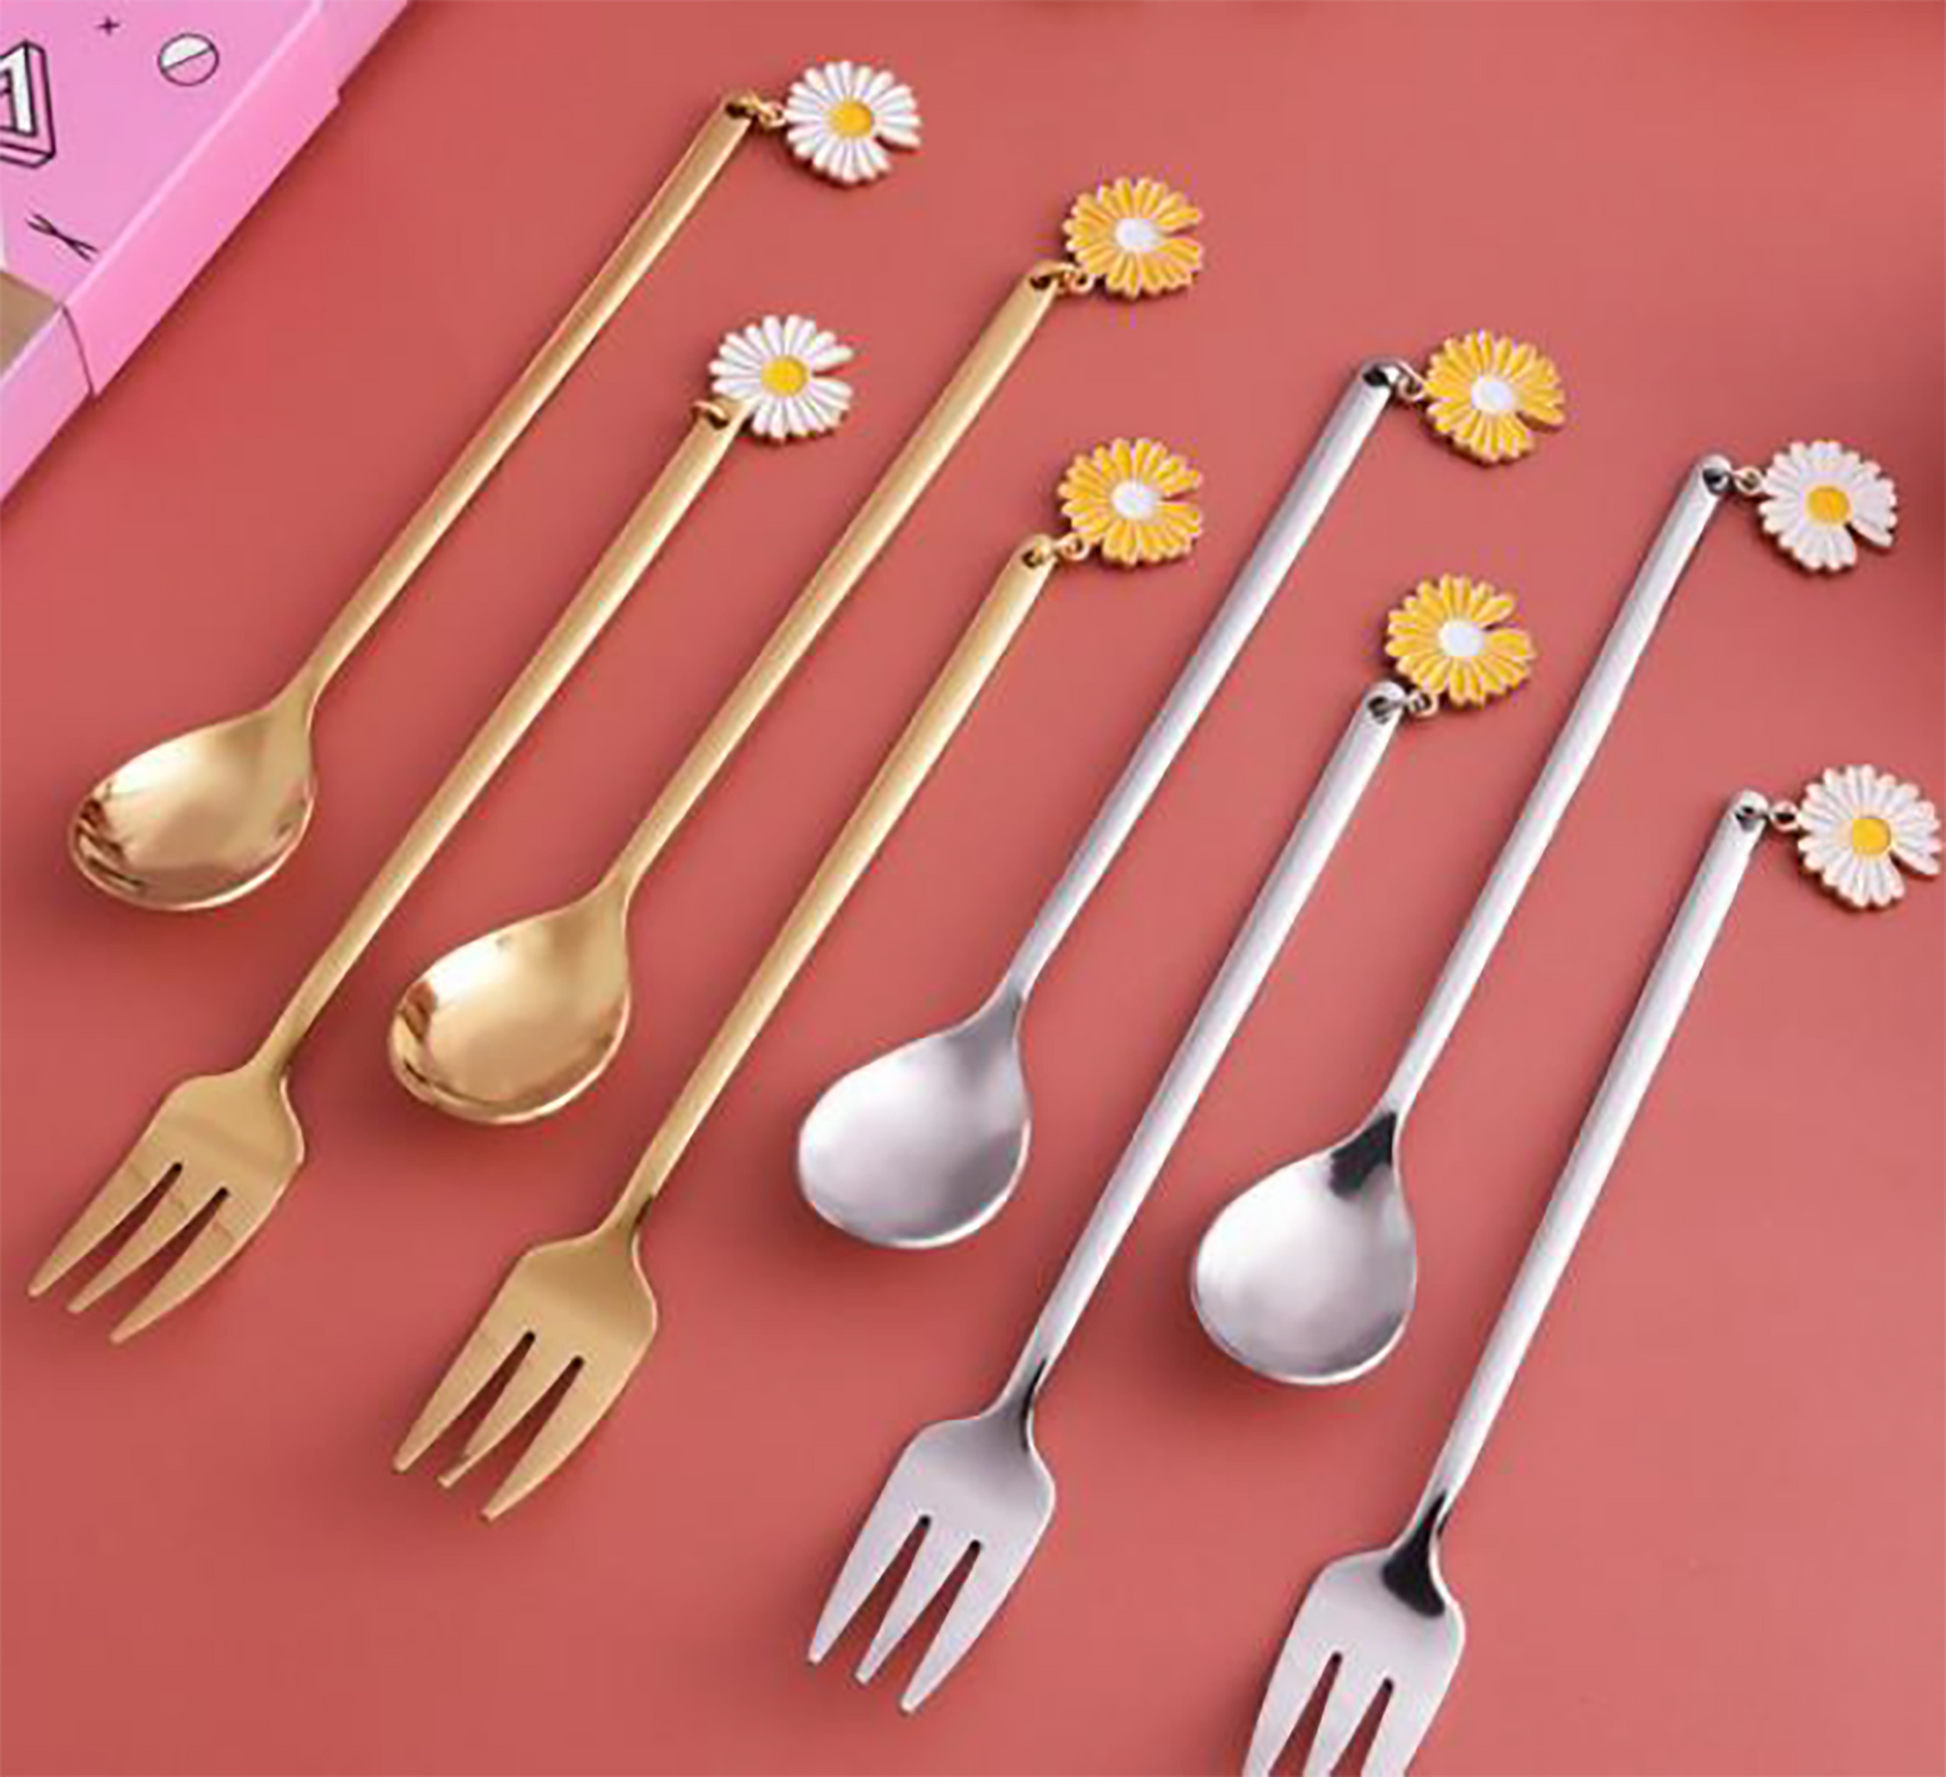 Daisy Dessert Spoons - Silver - Set of 3 - Gifts by Art Tree